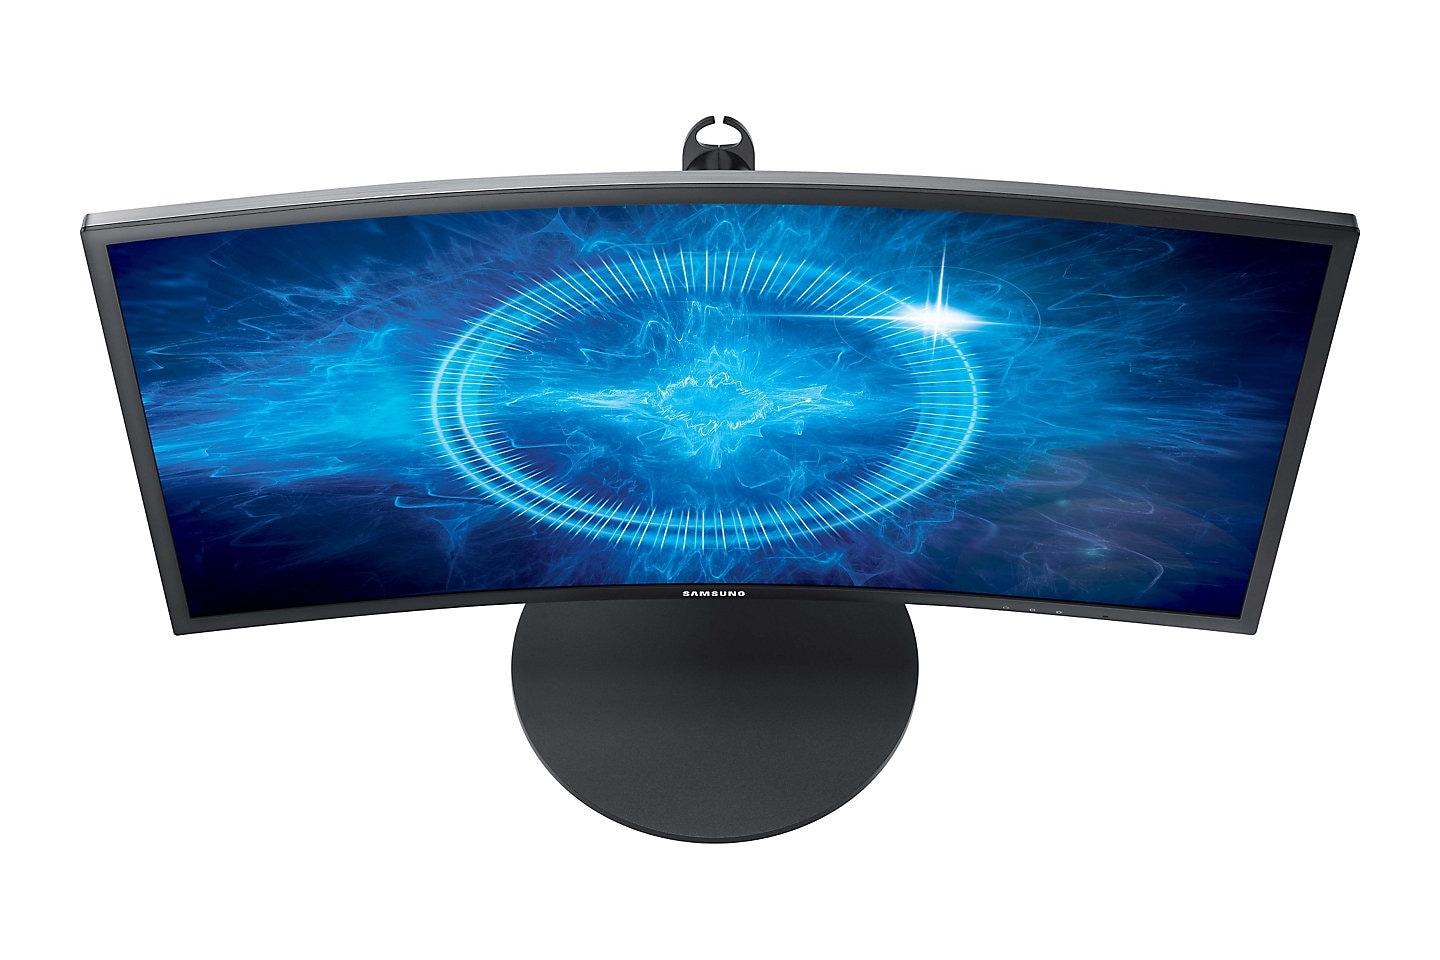 19° Screen curvature for an ultimate immersive experience